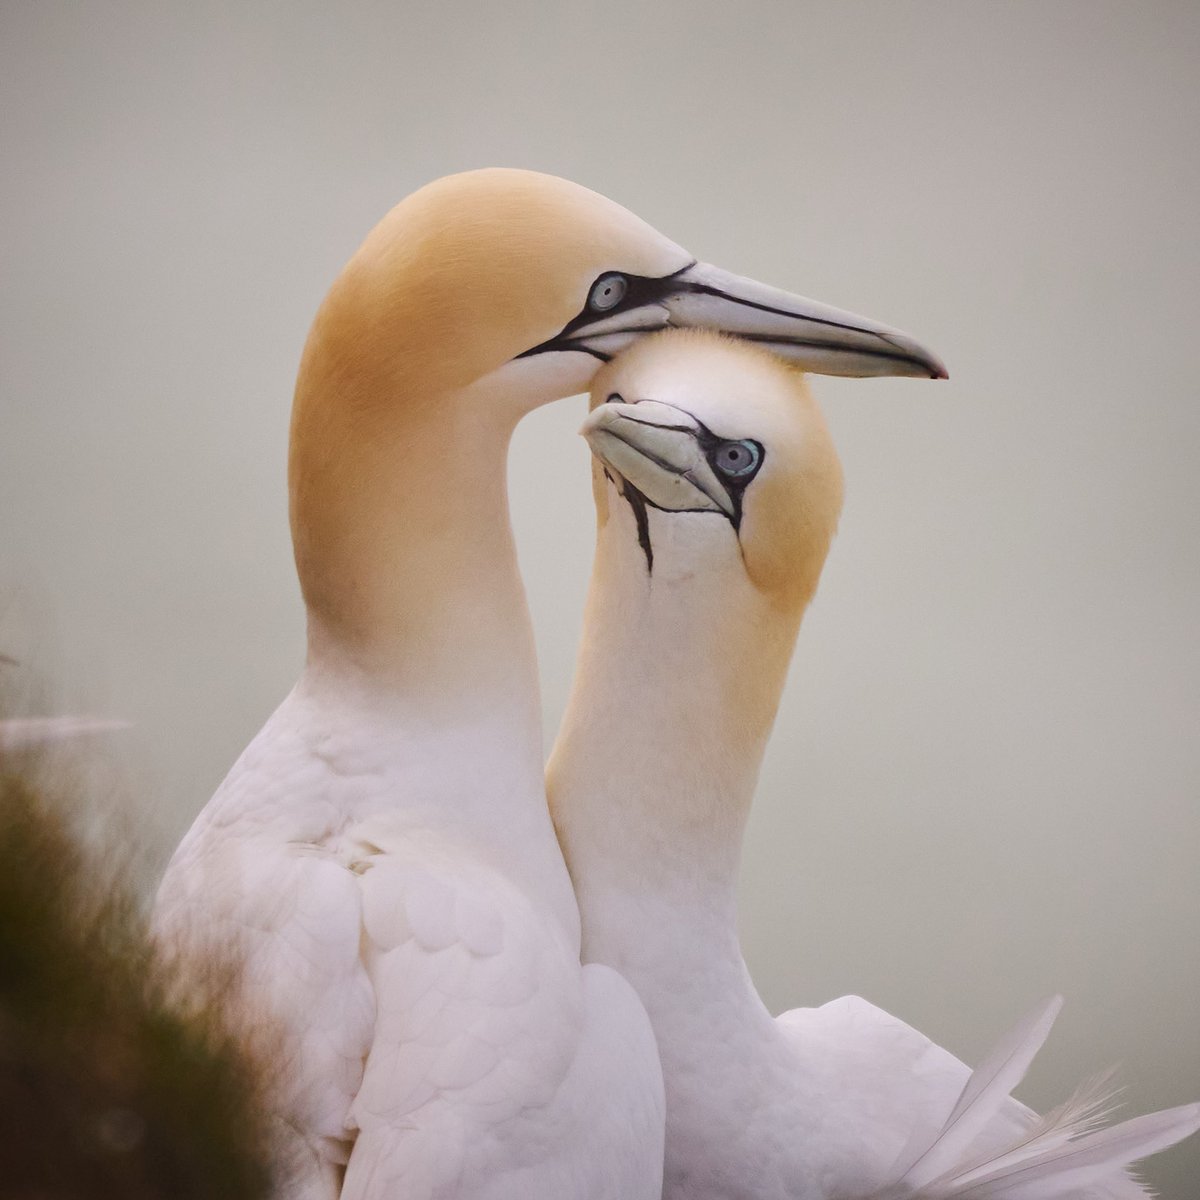 Lean On Me

Sometimes, you just need someone to lean on. 

Photo taken at RSPB Bempton Cliffs in the East Riding of Yorkshire.

#gannet #nikon180600 #nikonz8 #nikon #rspb #rspb_birds #seabirds #rspb_bempton